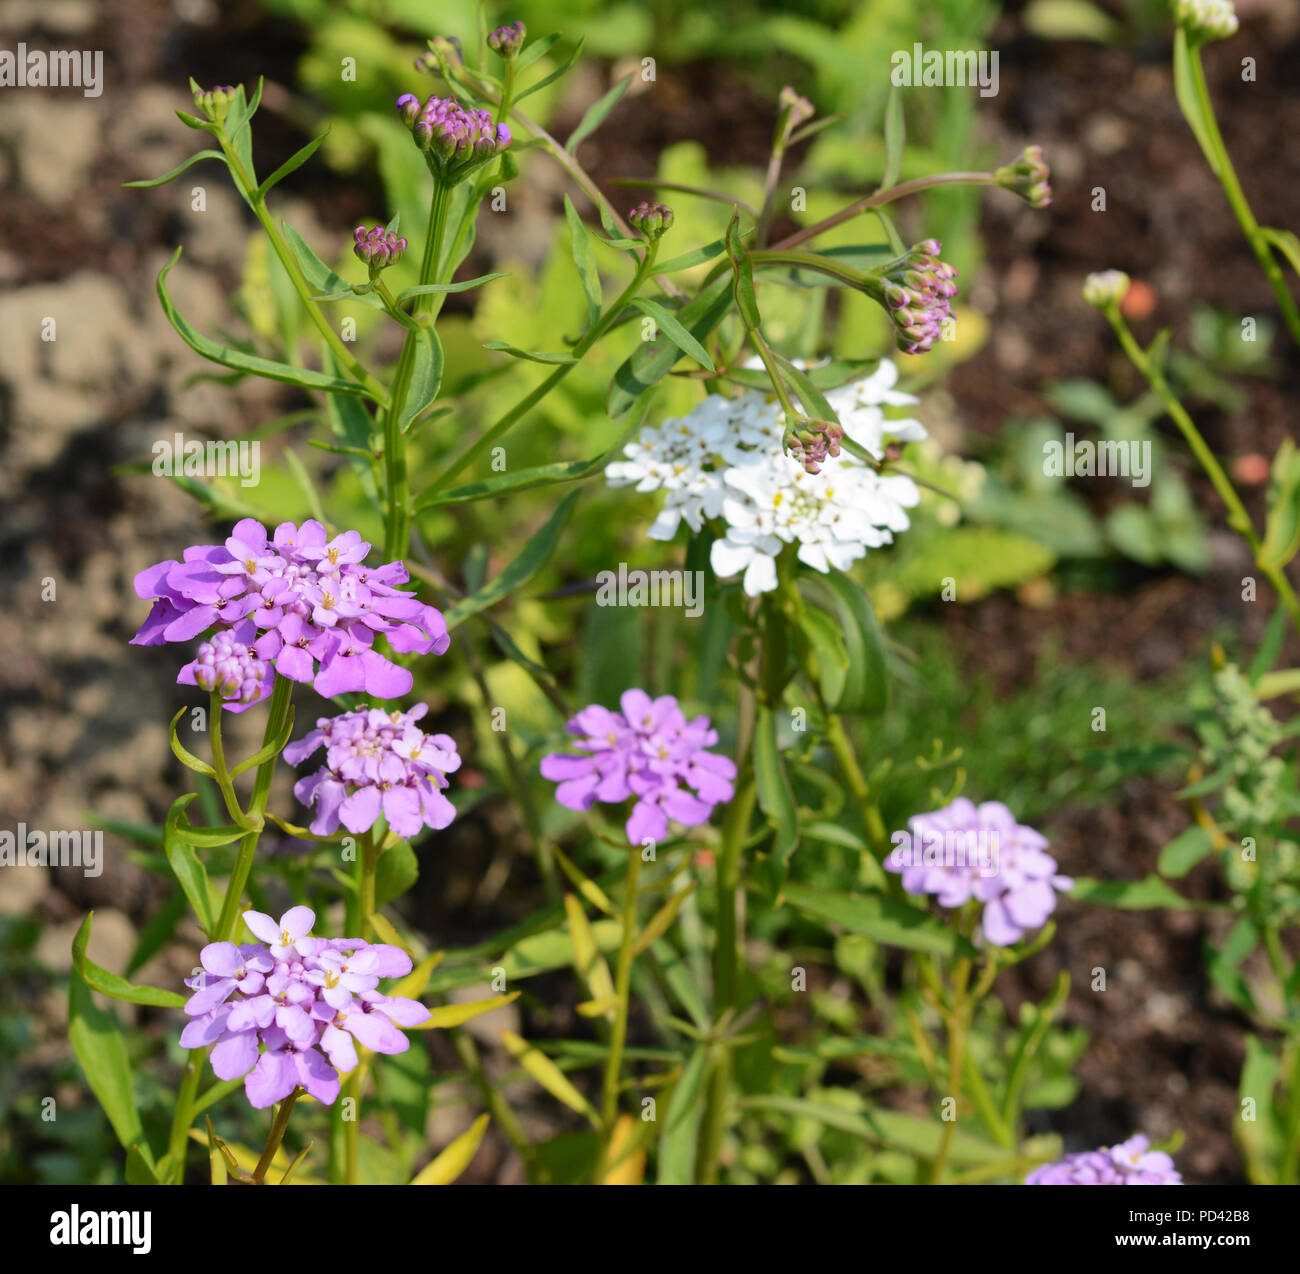 Purple and white candytuft flowers, iberis umbellata, blooming in a flower bed Stock Photo